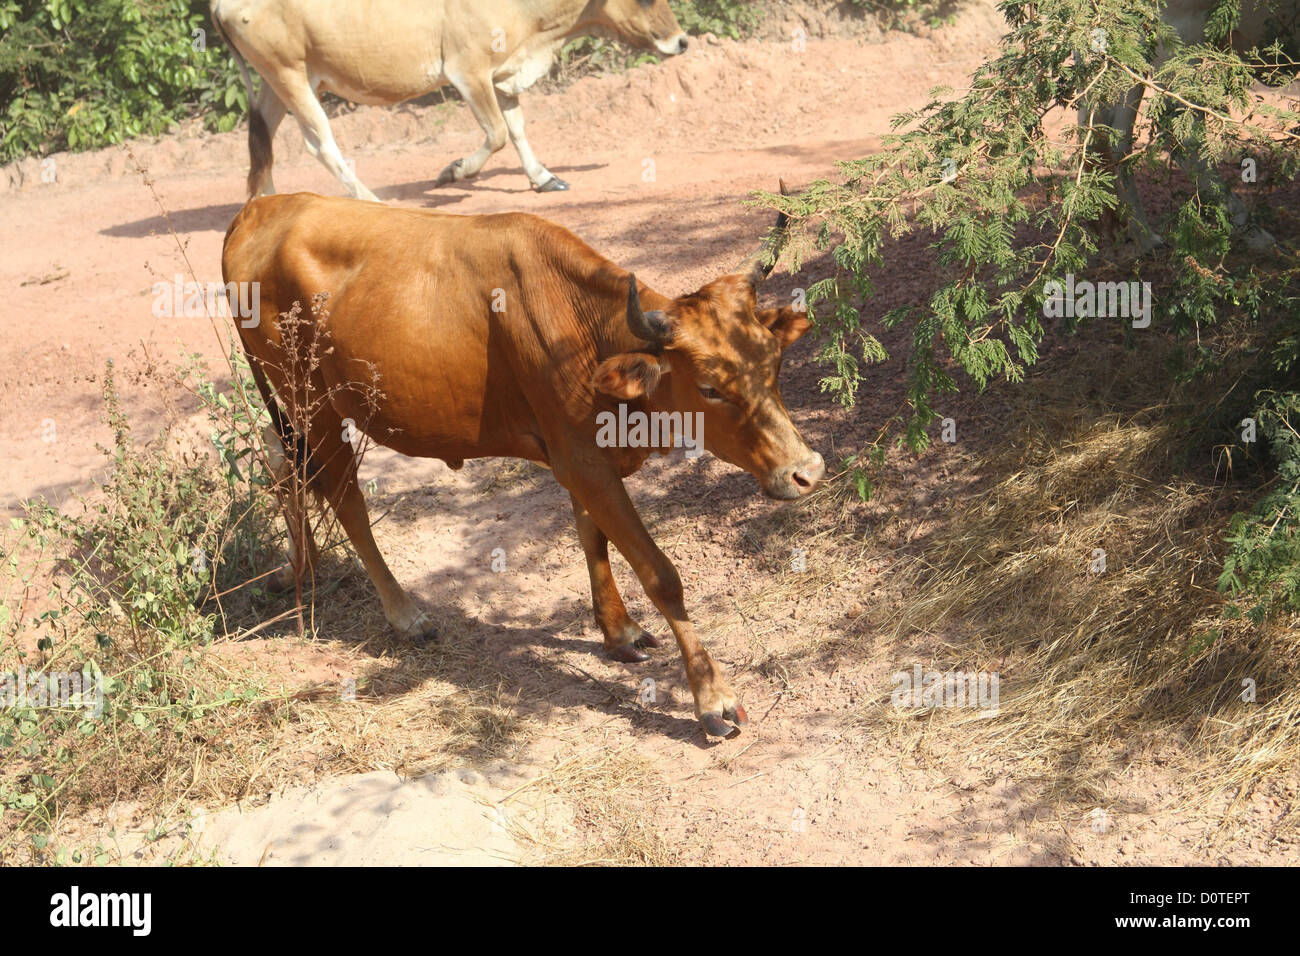 Cattle in The Gambia, West Africa Stock Photo